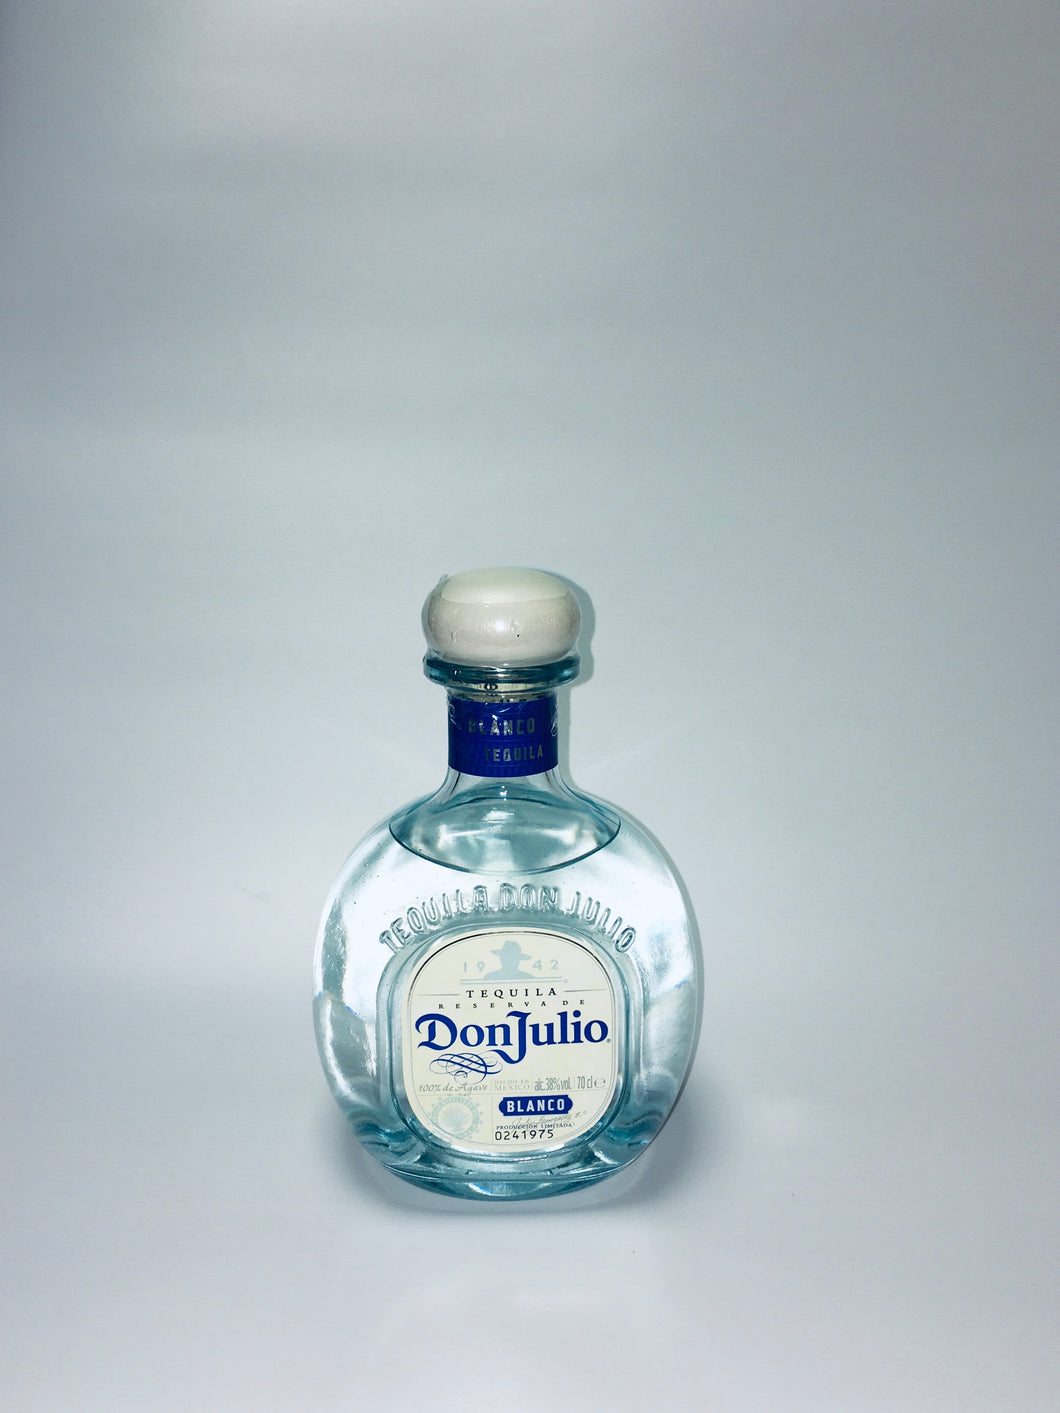 Tequila Don Julio “Blanco” 70cl